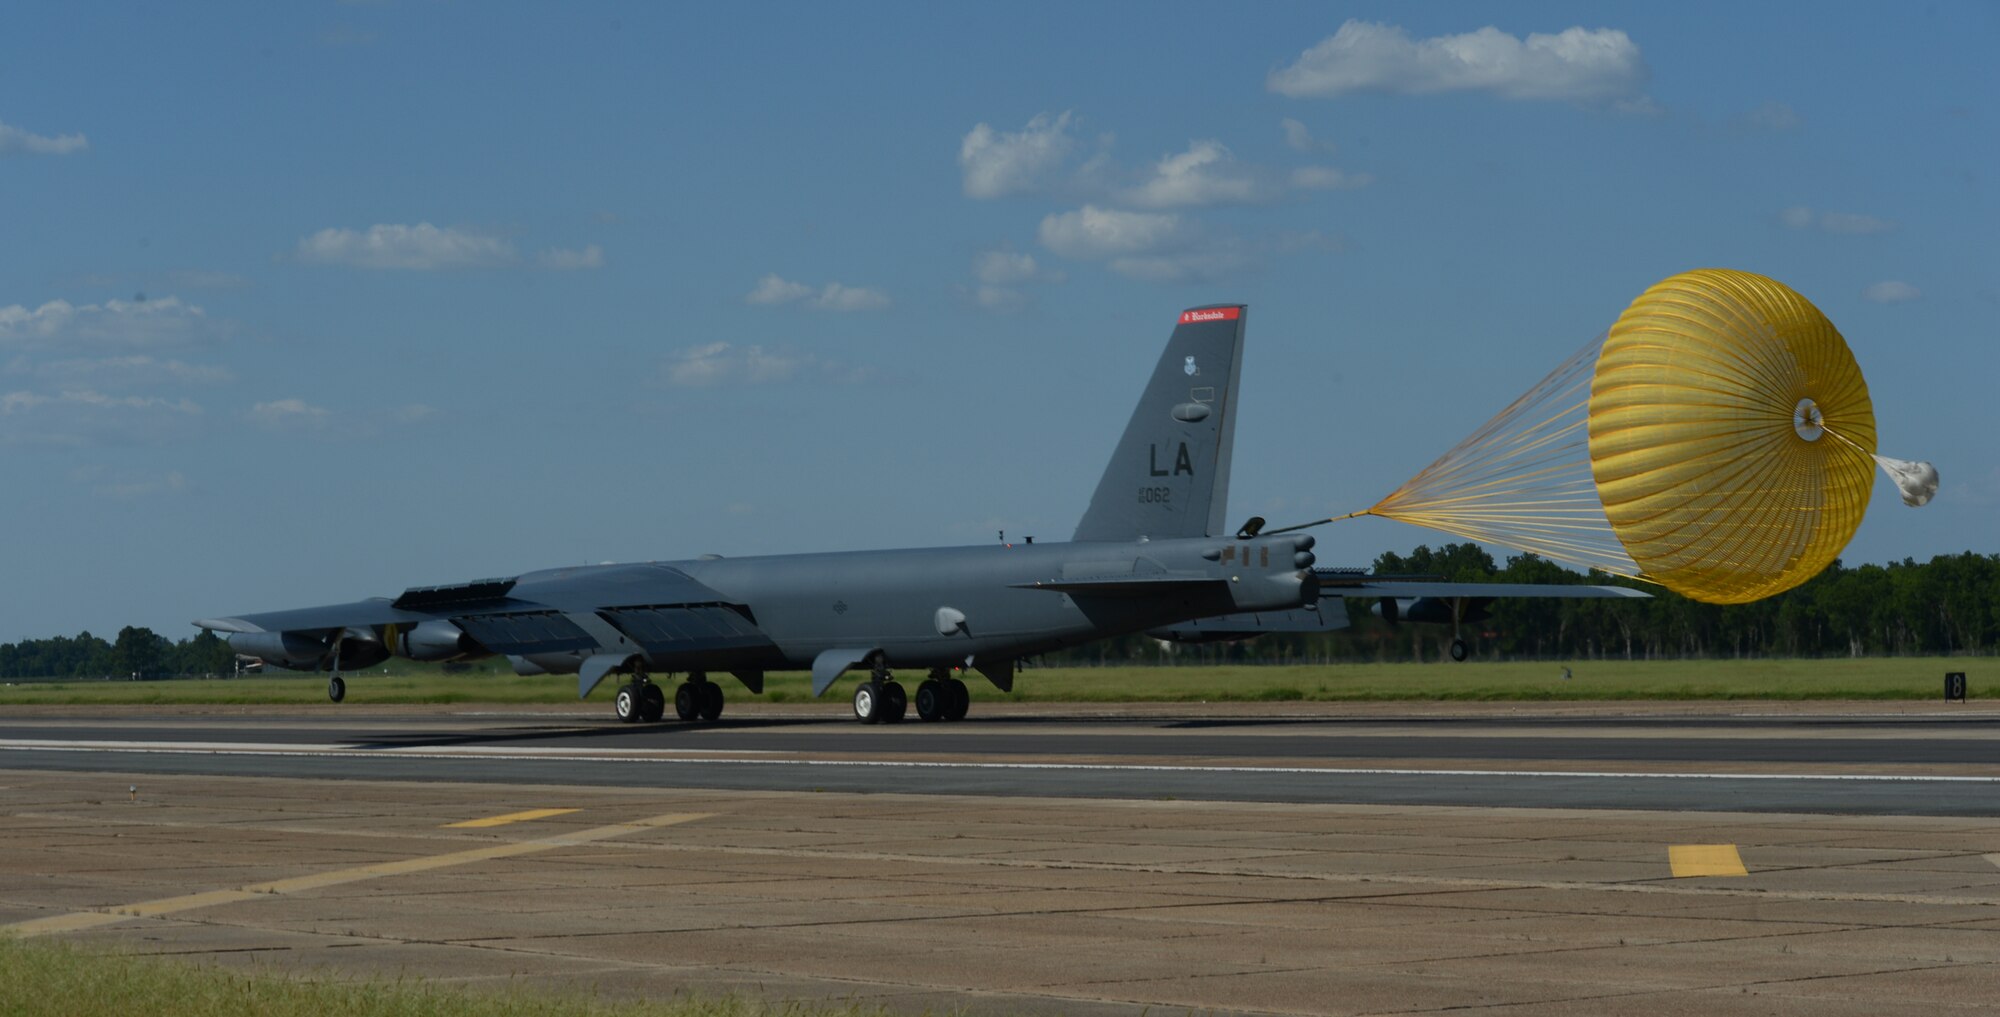 A B52-H Stratofortress lands at Barksdale Air Force Base, Louisiana, after a 15.5-hour nonstop sortie from the United States to the U.S. Southern Command area of responsibility Aug. 12, 2014. The long-range intelligence, surveillance and reconnaissance mission was part of a scenario to defend the Panama canal from myriad threats during PANAMAX 2014, a multinational U.S. Southern Command-sponsored exercise.  (U.S. Air Force photo/Senior Airman Benjamin Gonsier)